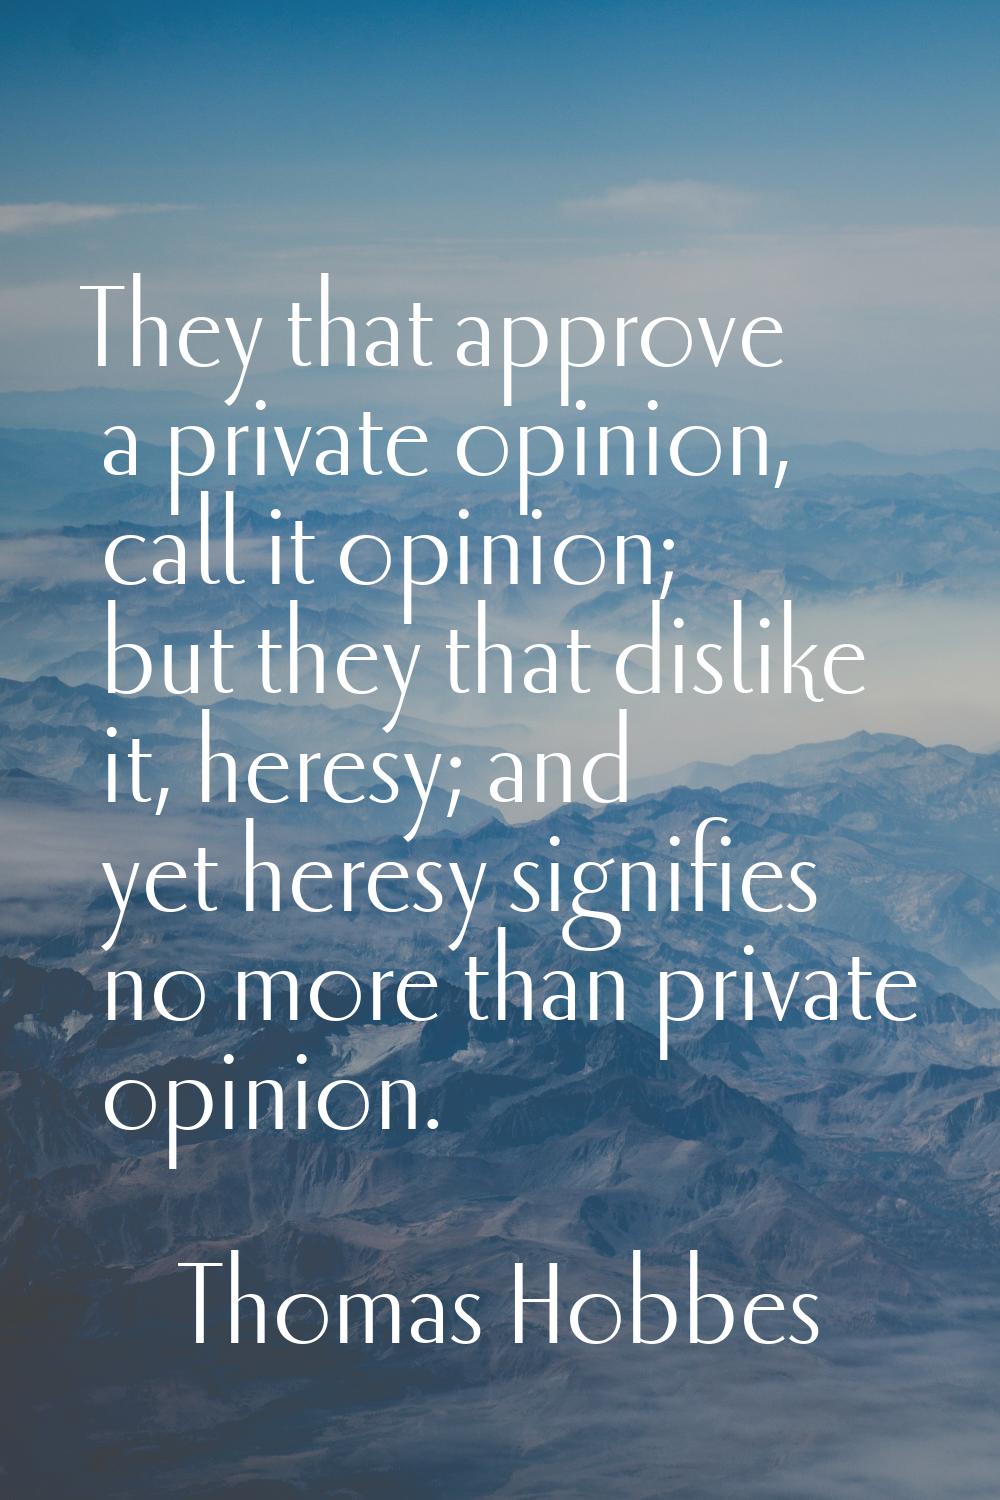 They that approve a private opinion, call it opinion; but they that dislike it, heresy; and yet her